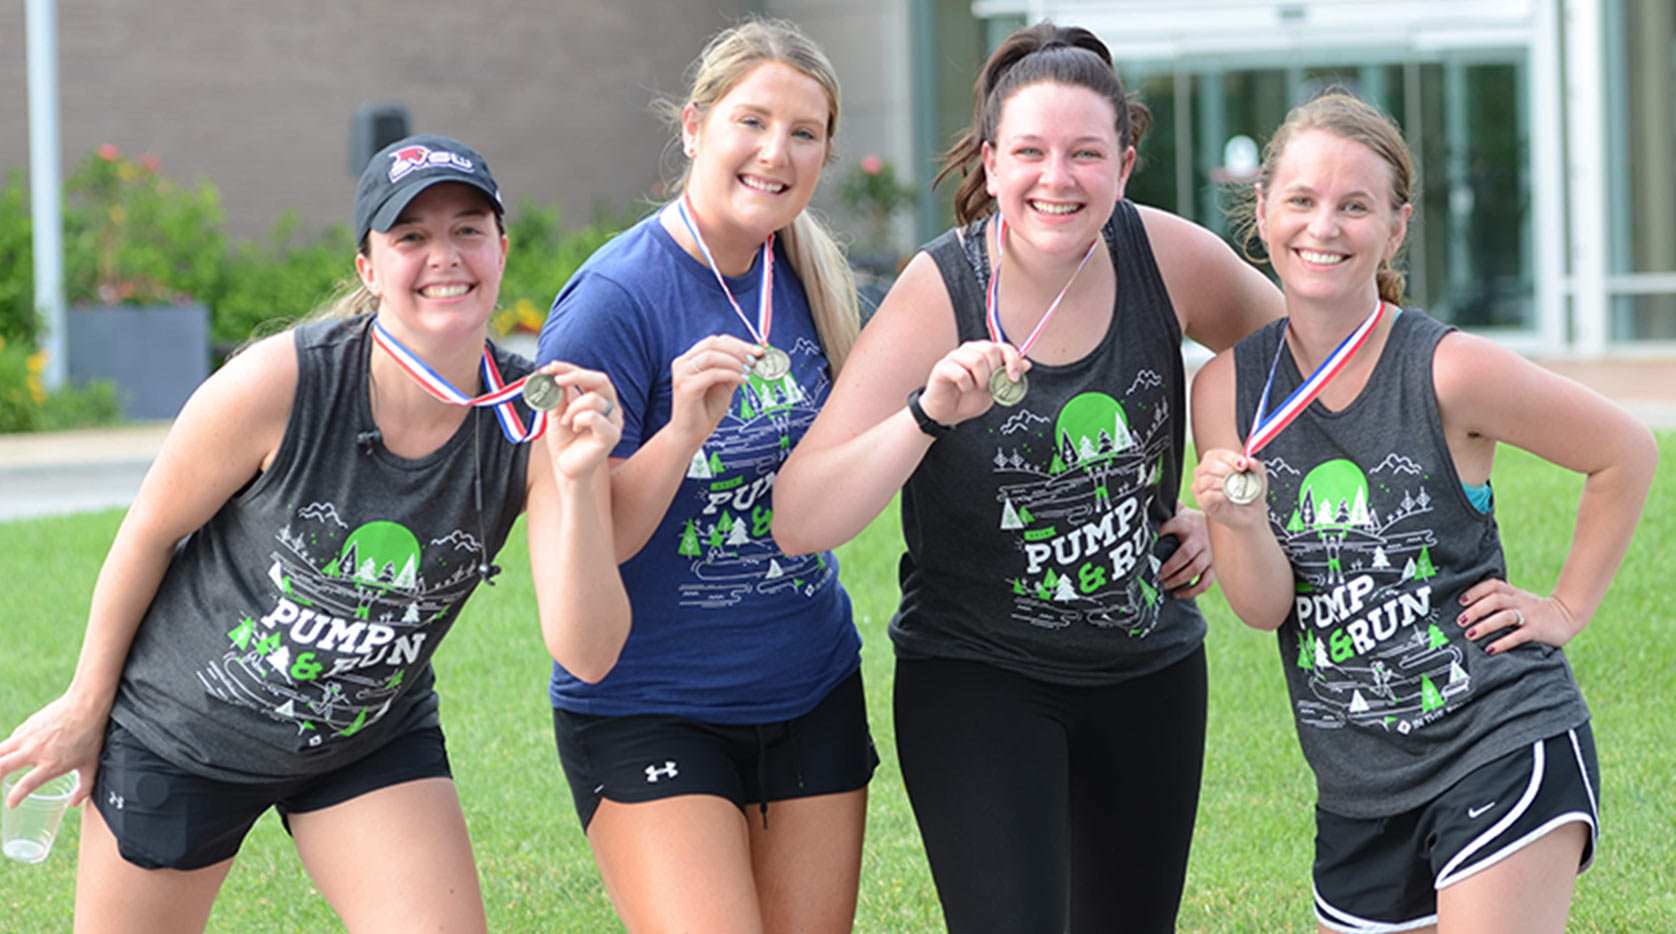 Four female athletes showing off medals in Pump and Run t-shirts.